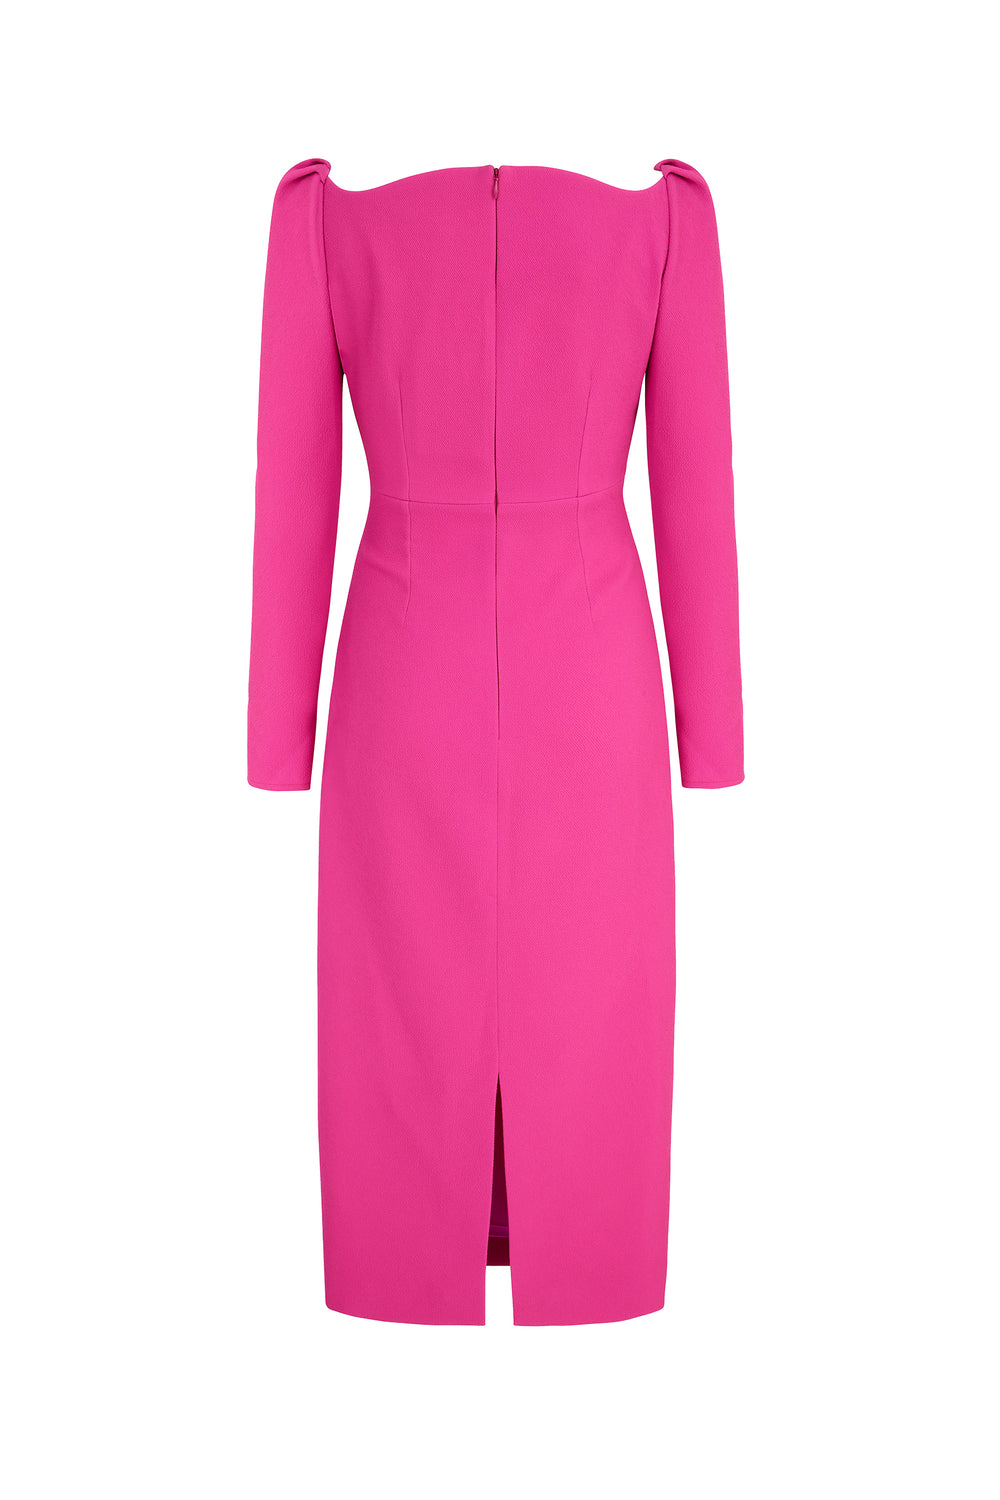 Crepe London Stretch | Suzannah Halley | Pink Dress Hot